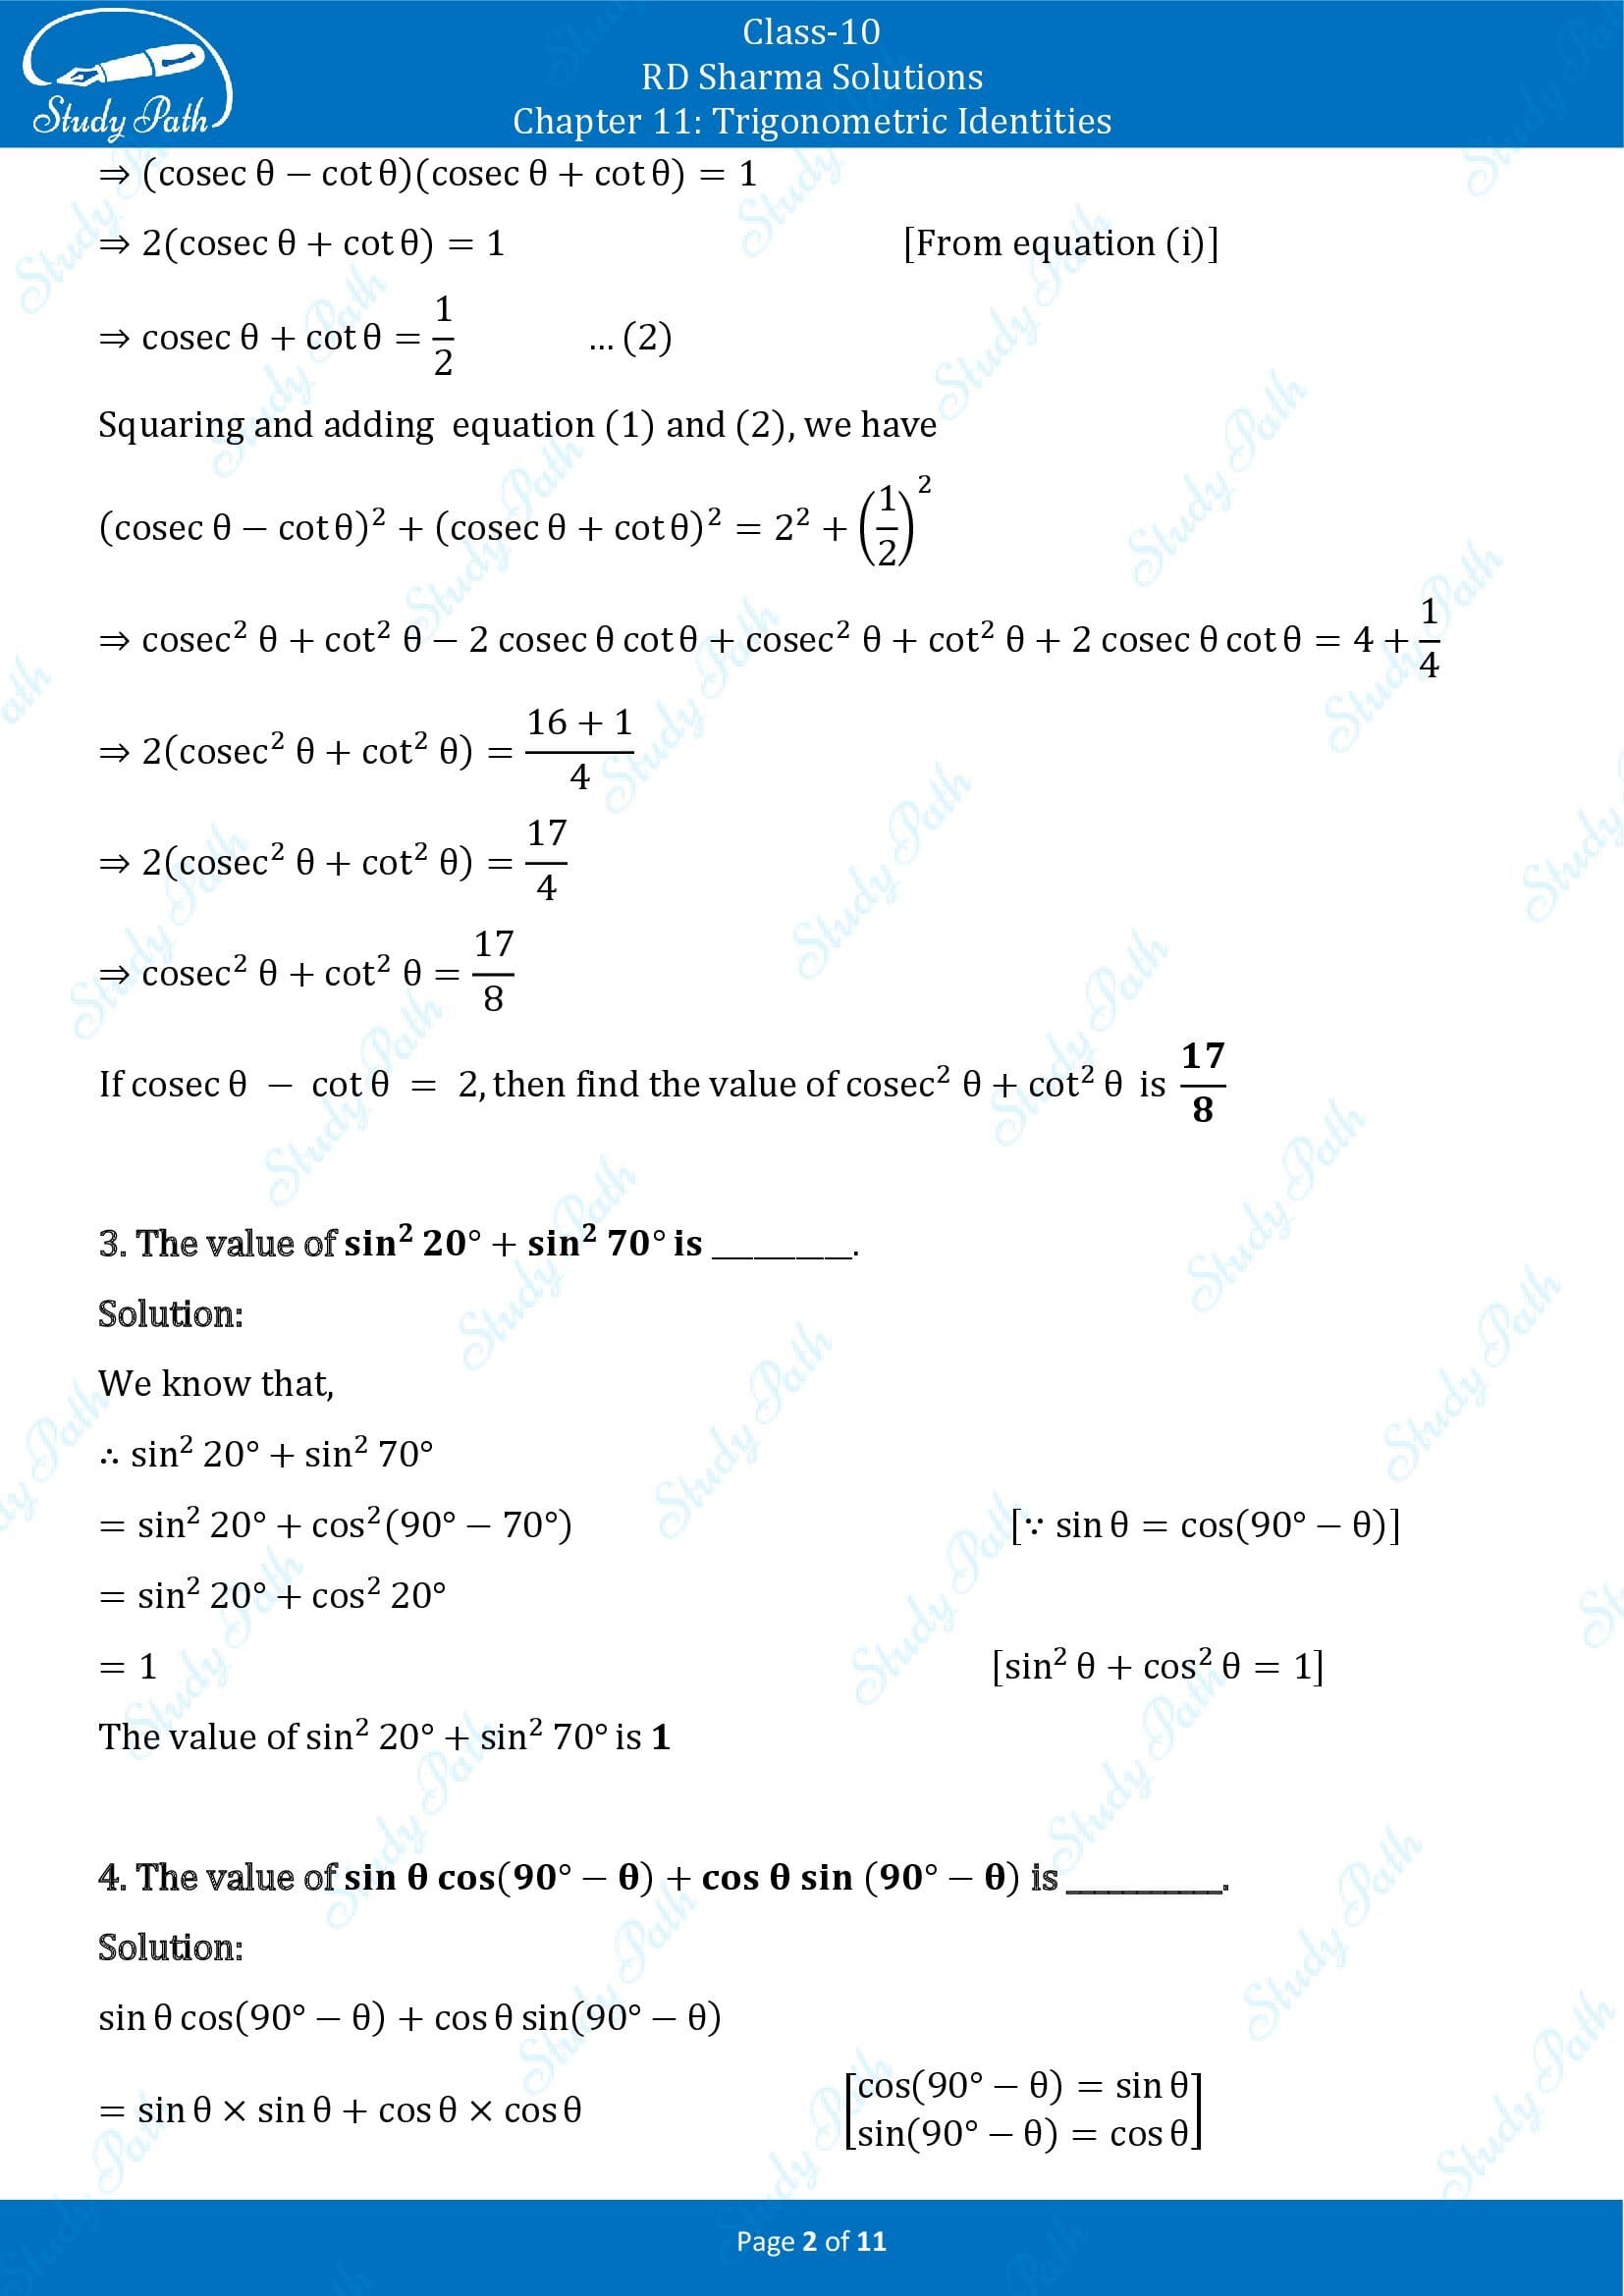 RD Sharma Solutions Class 10 Chapter 11 Trigonometric Identities Fill in the Blank Type Questions FBQs 00002